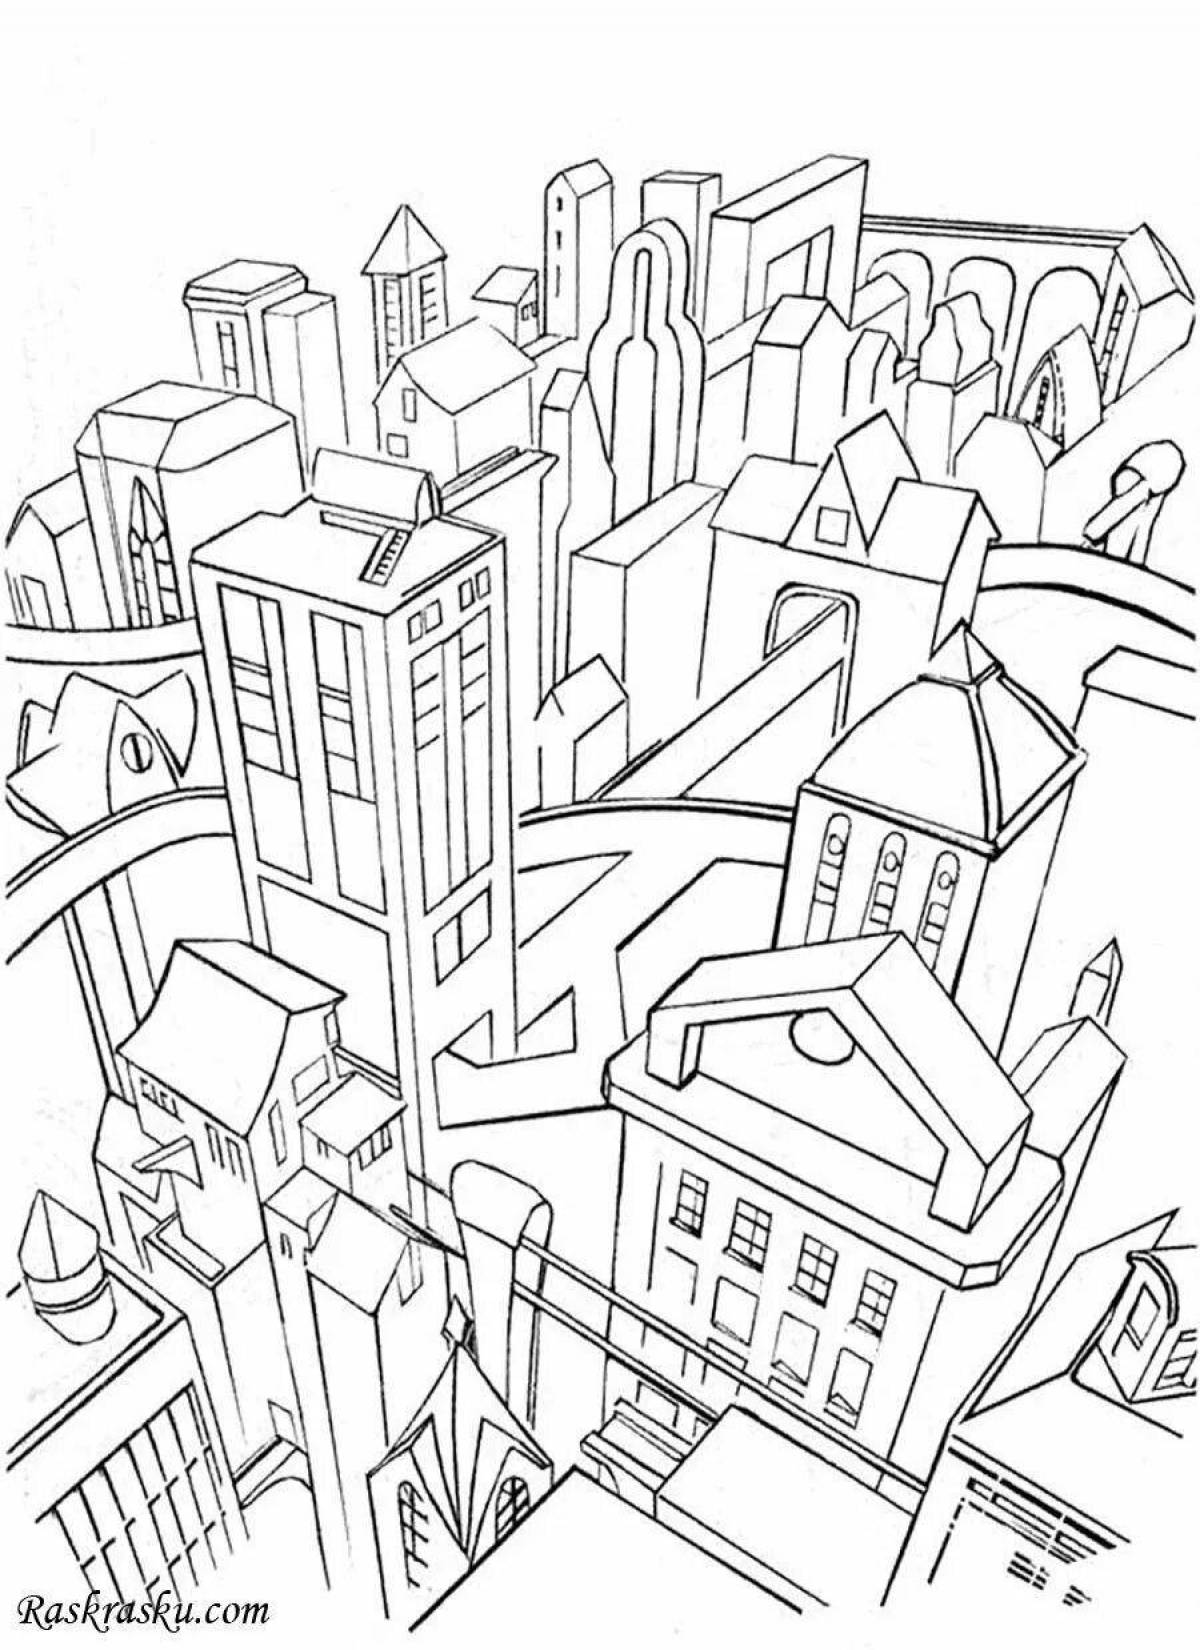 Glamorous modern city coloring page